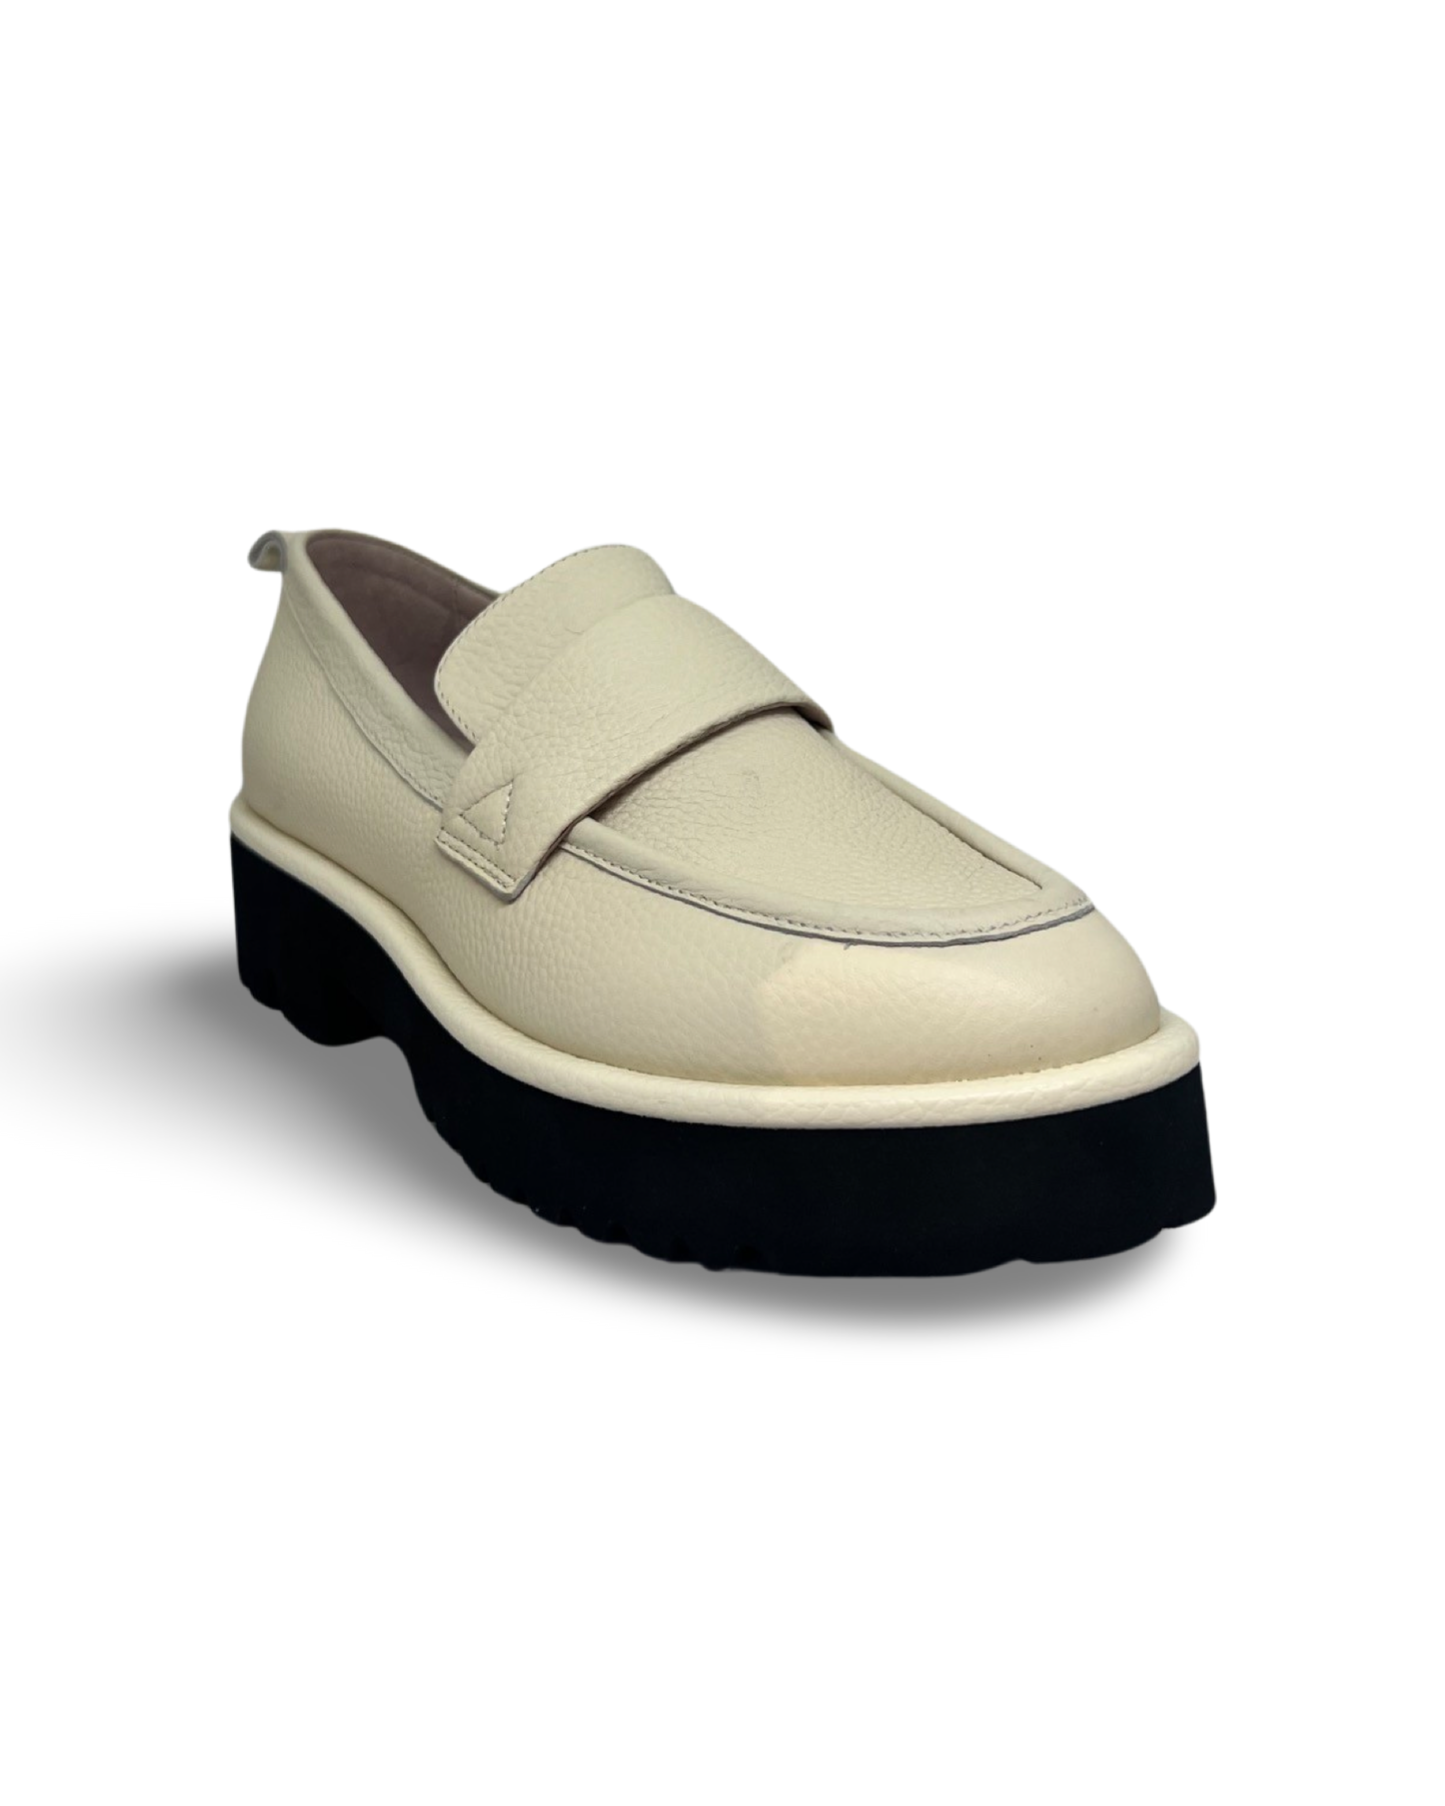 Hipster Loafer By Andrea Biani - Oat